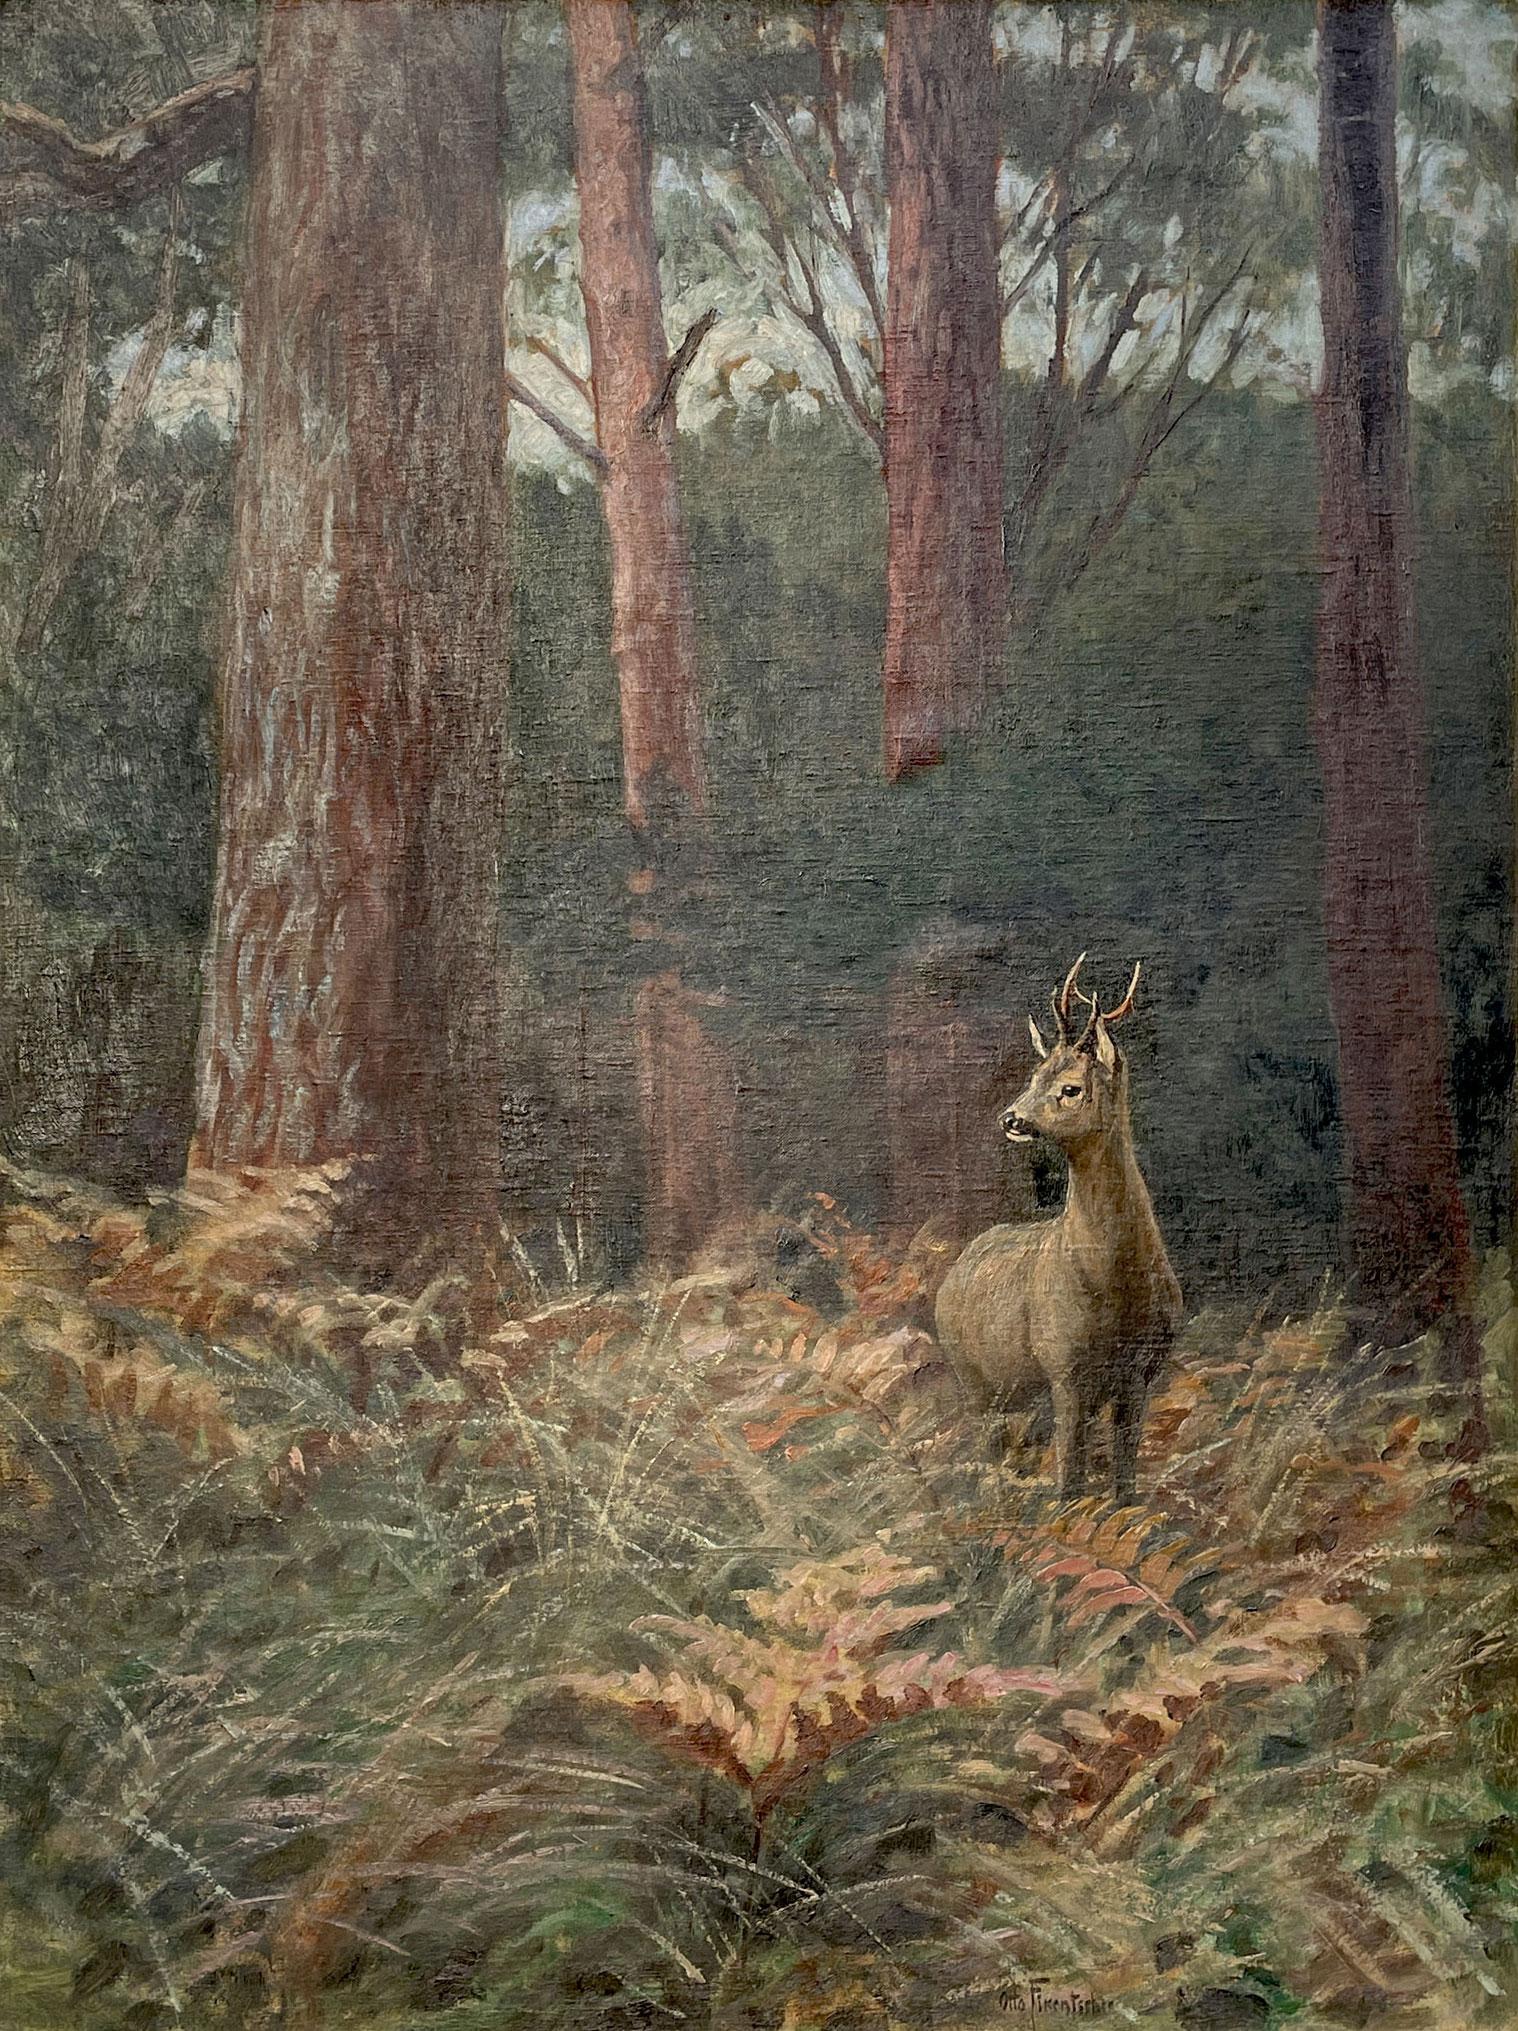 Fikentscher, Otto (1862 - 1945) - Roe deer in the forest

Measures: 90 x 65 cm - dimensions referring to the canvas only
102 x 78 cm - frame size included
Oil painting on canvas, signed lower right.
1910s era.

A male roe deer, in its